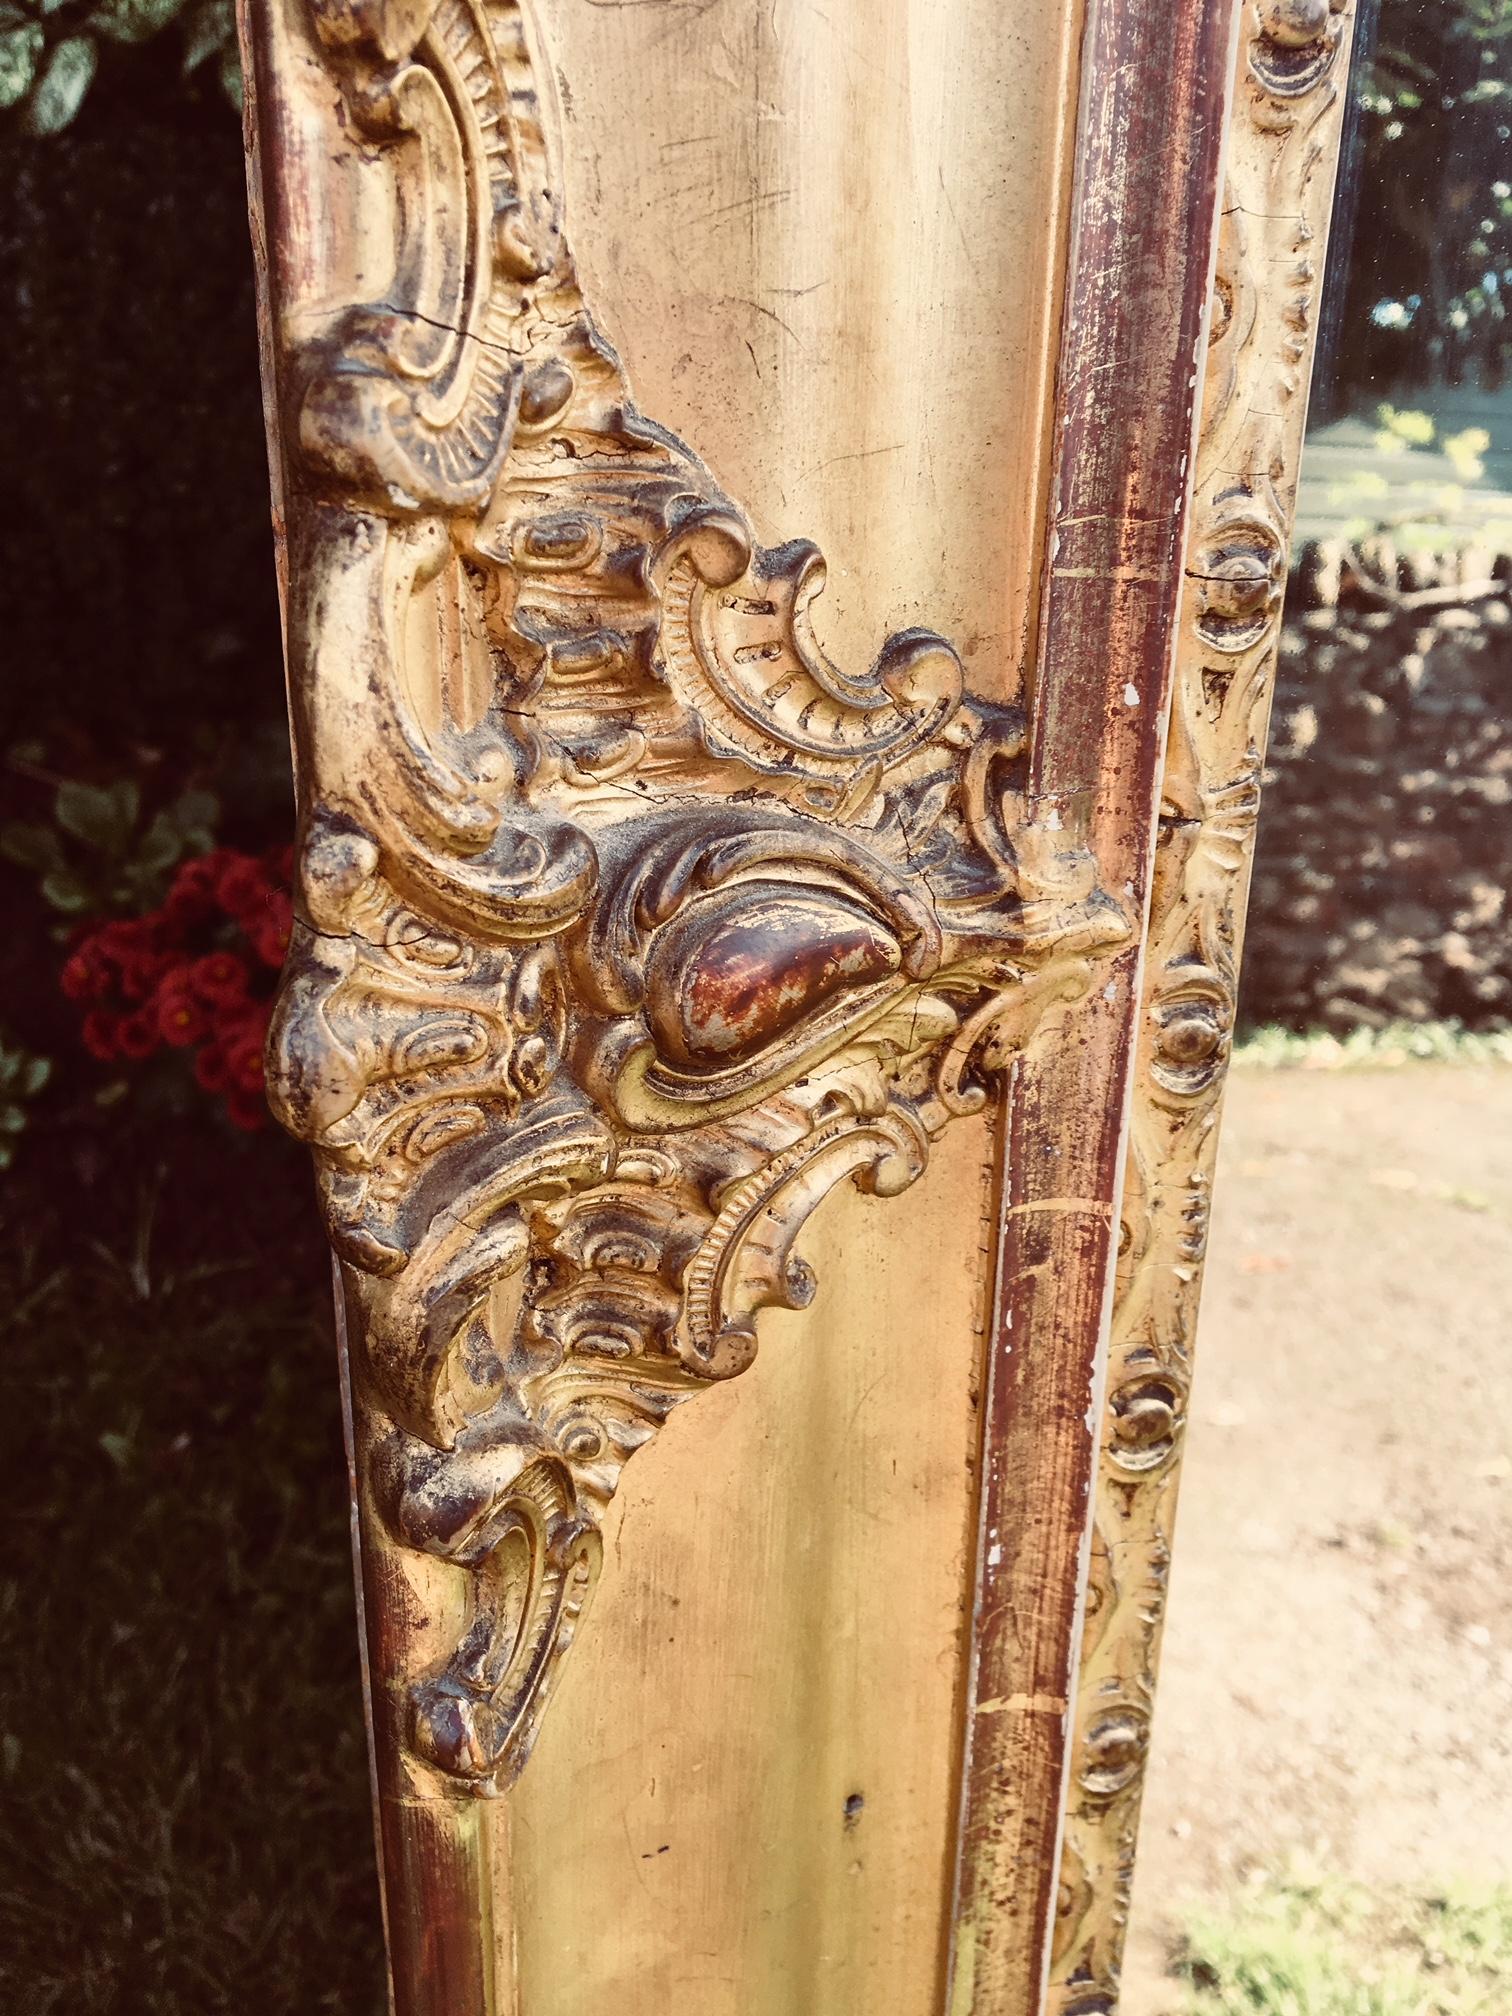 Attractive gilt mirror / overmantel in good used condition, French, circa 1890
This delightful mirror has its original glass with a few tiny blemishes, The frame is good and sound with a water gilded finish. Some small areas will be restored prior